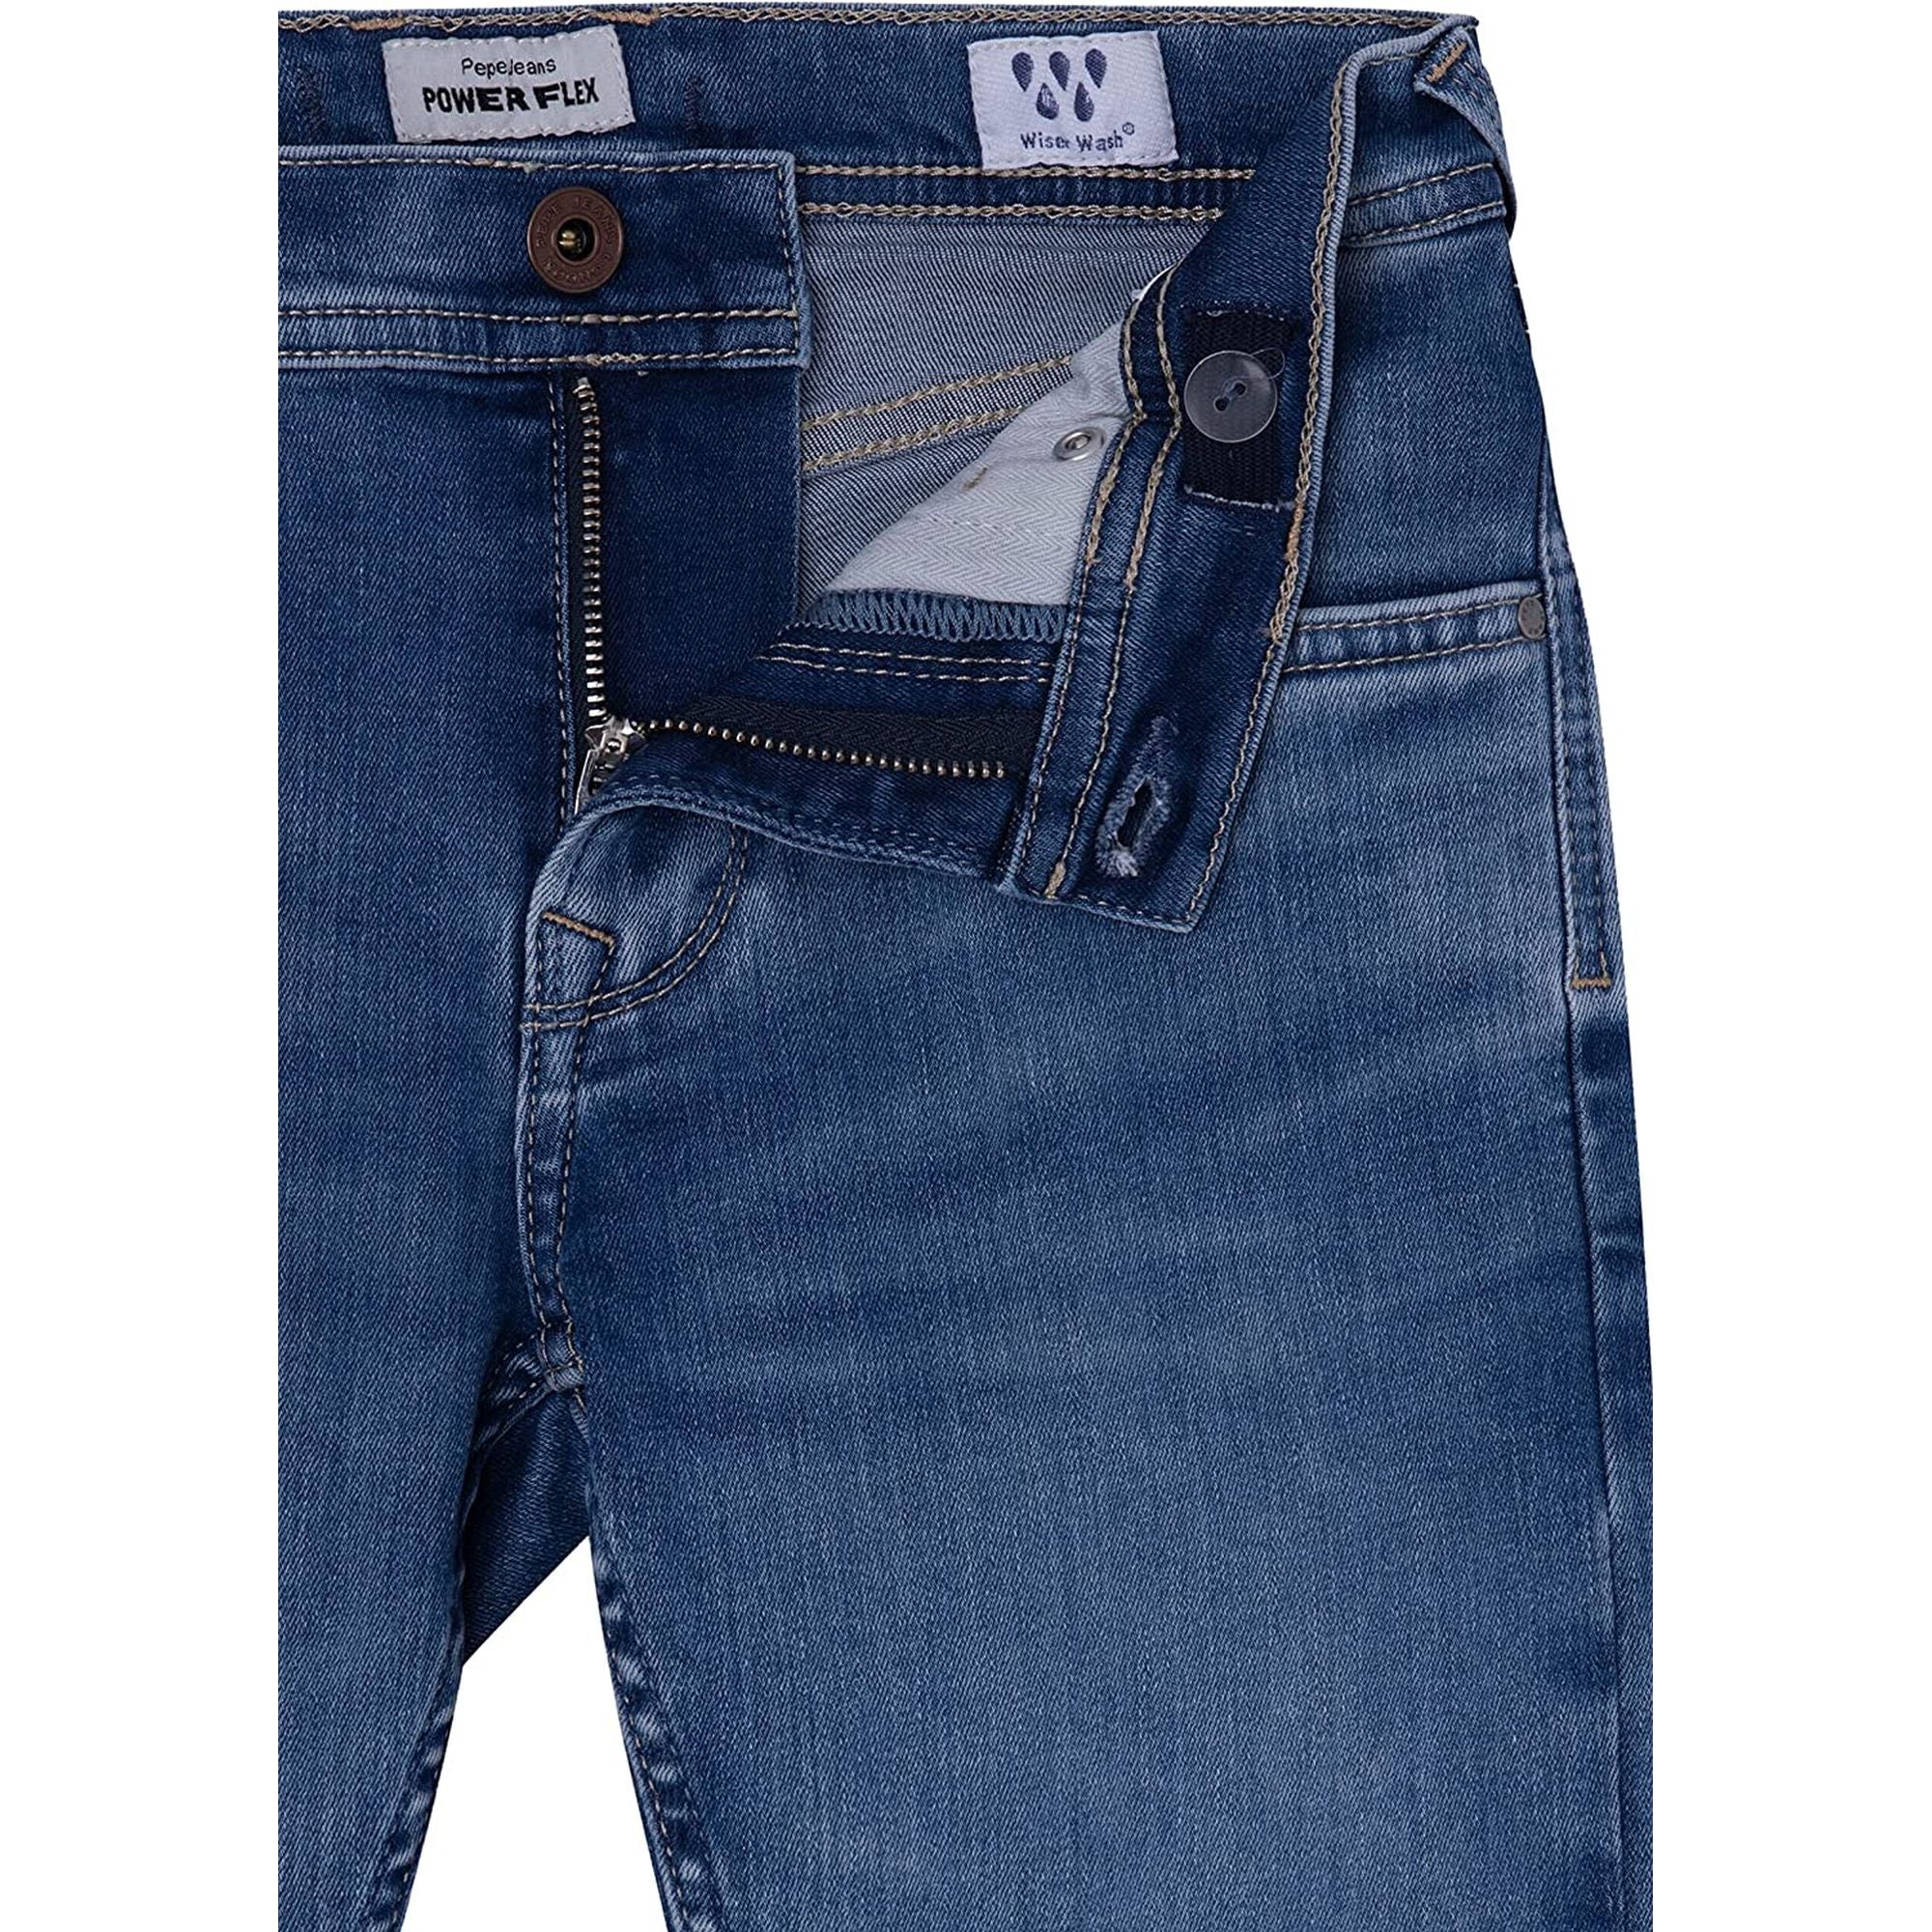 Jeans PEPE JEANS Bambino FINLY Blu